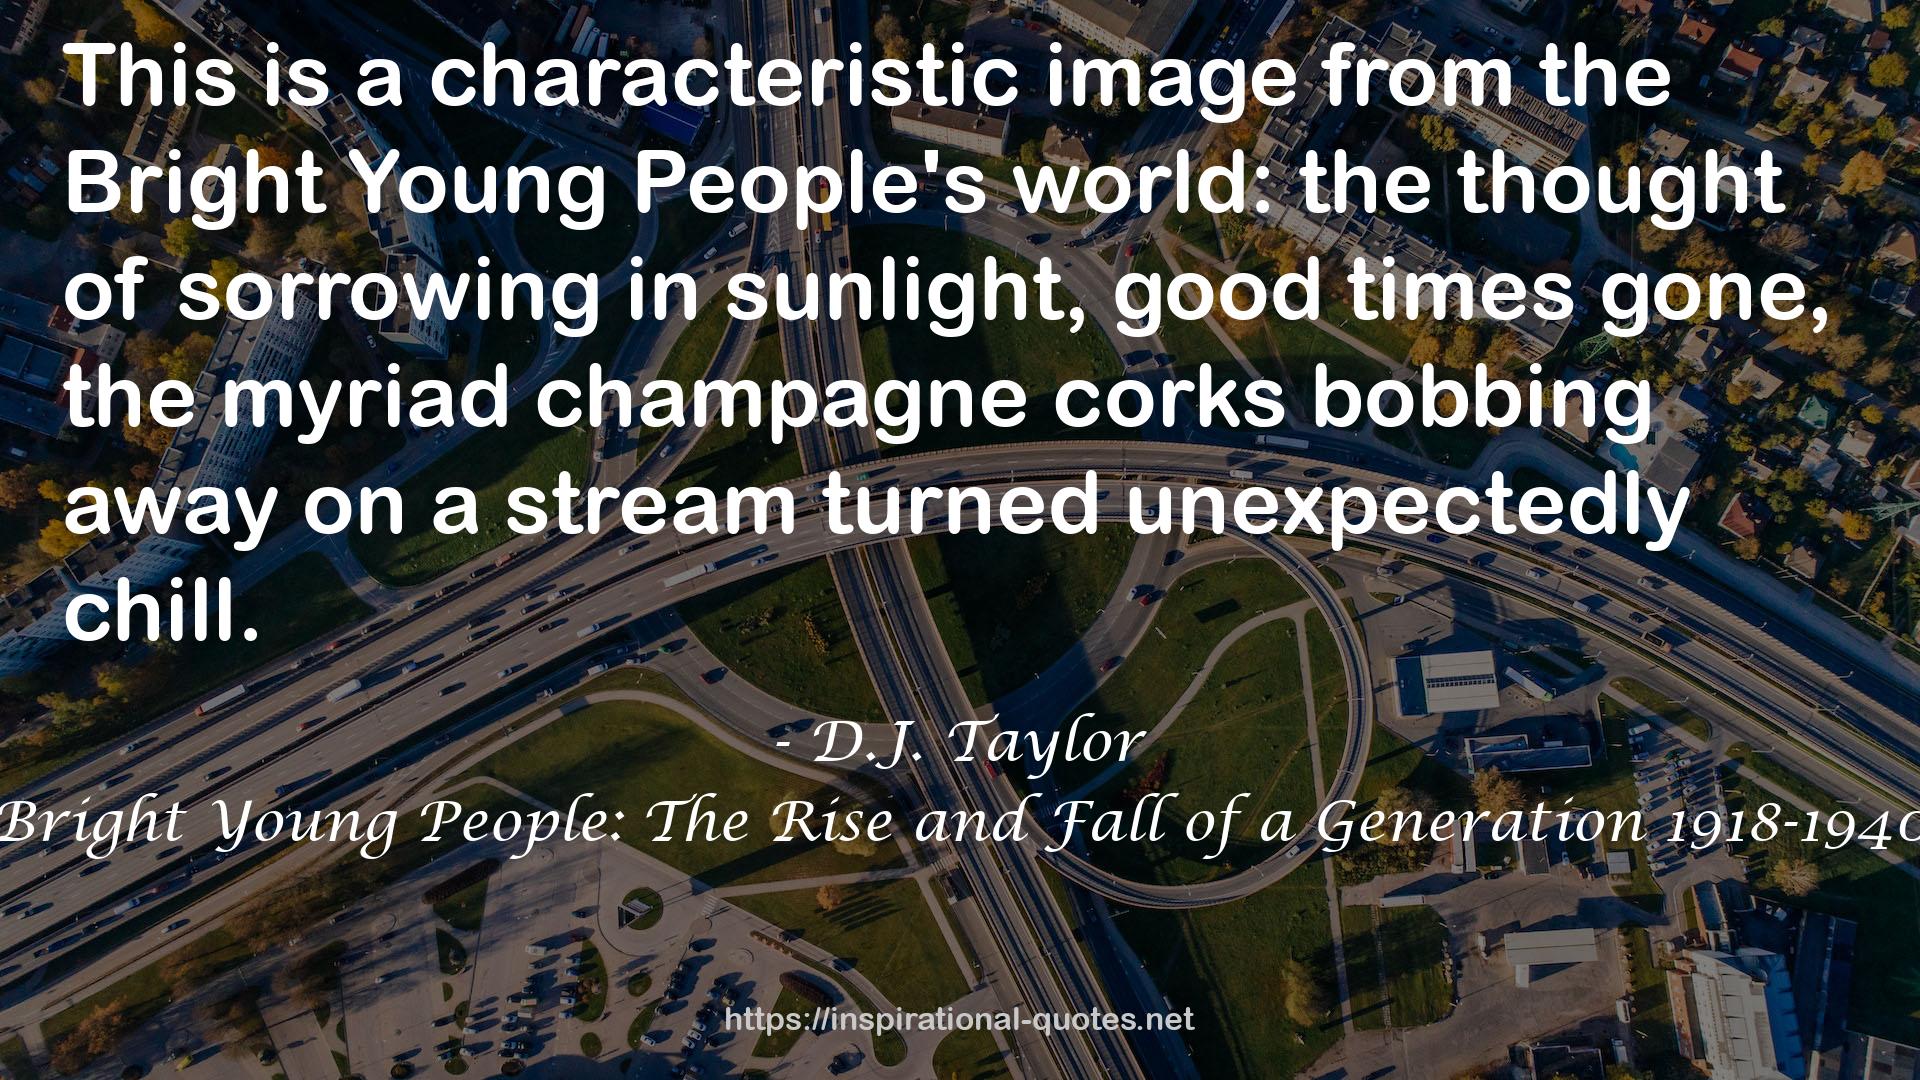 Bright Young People: The Rise and Fall of a Generation 1918-1940 QUOTES